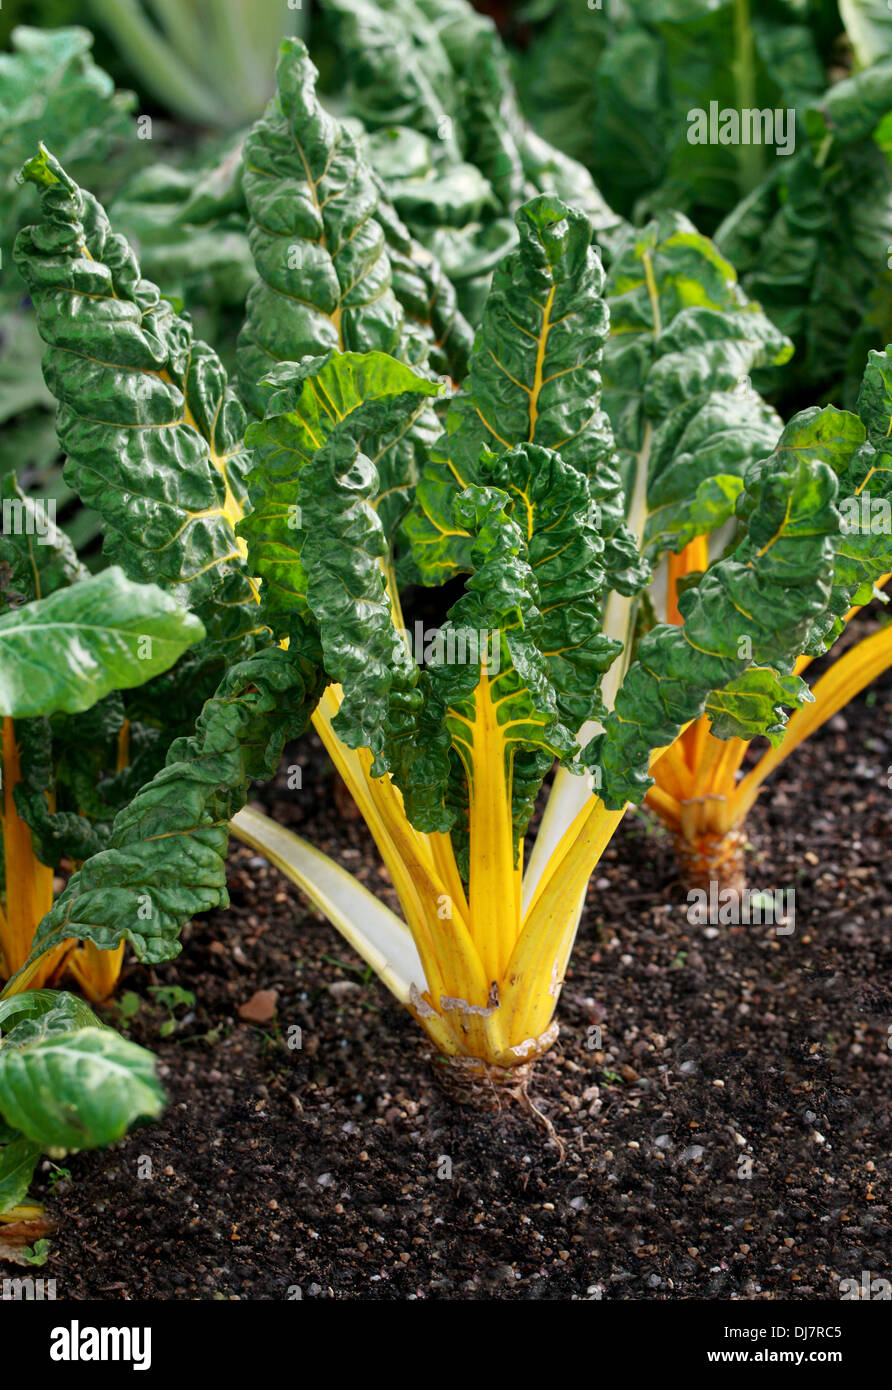 Chard, Beta vulgaris, Amaranthaceae. Yellow stemmed cultivar. A leafy green vegetable often used in Mediterranean cooking. Stock Photo